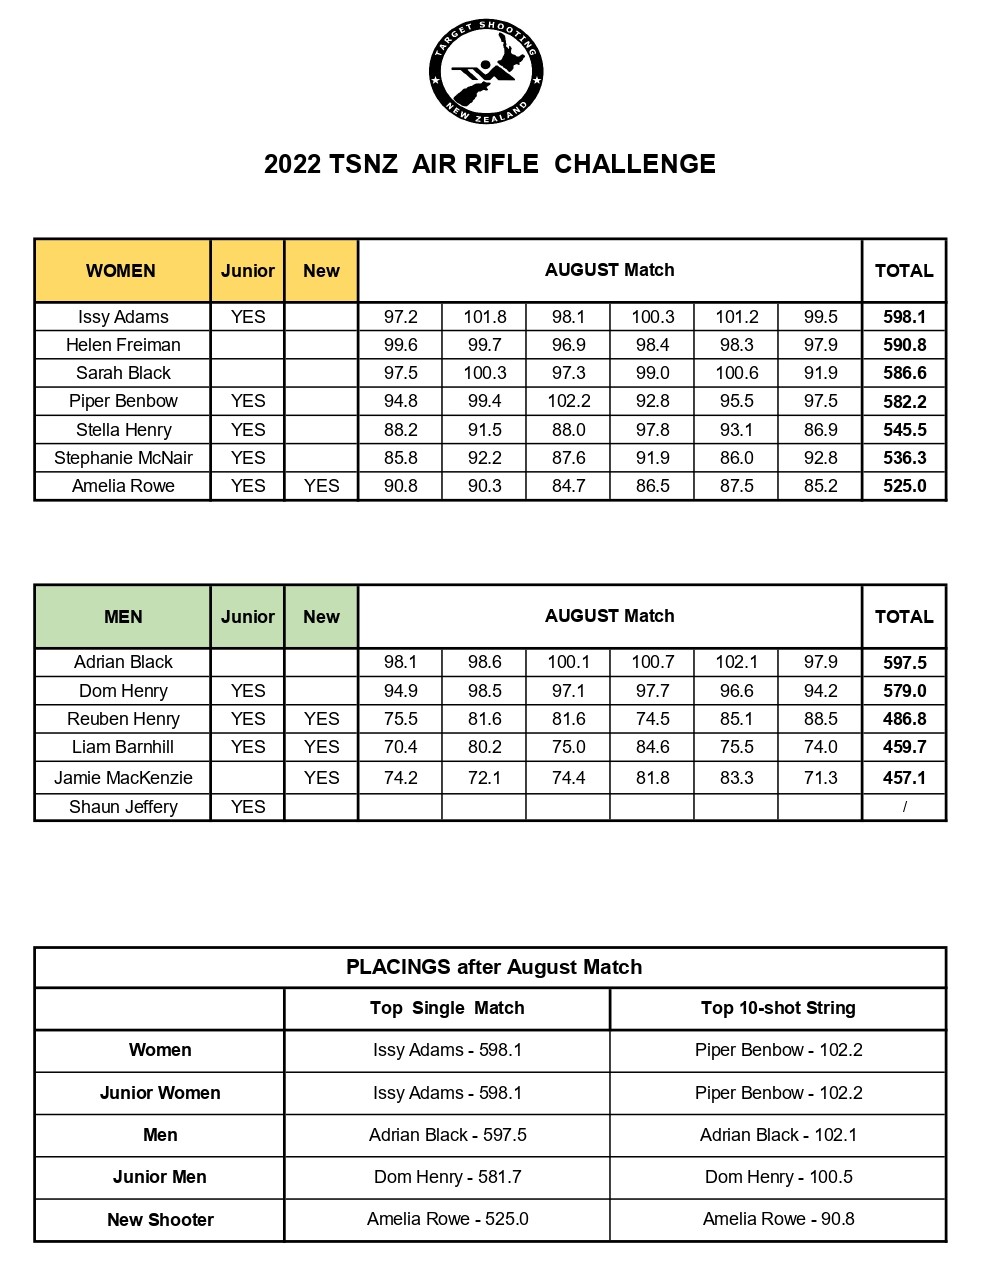 v2 air rifle challenge 2022 _ results _ august.jpg